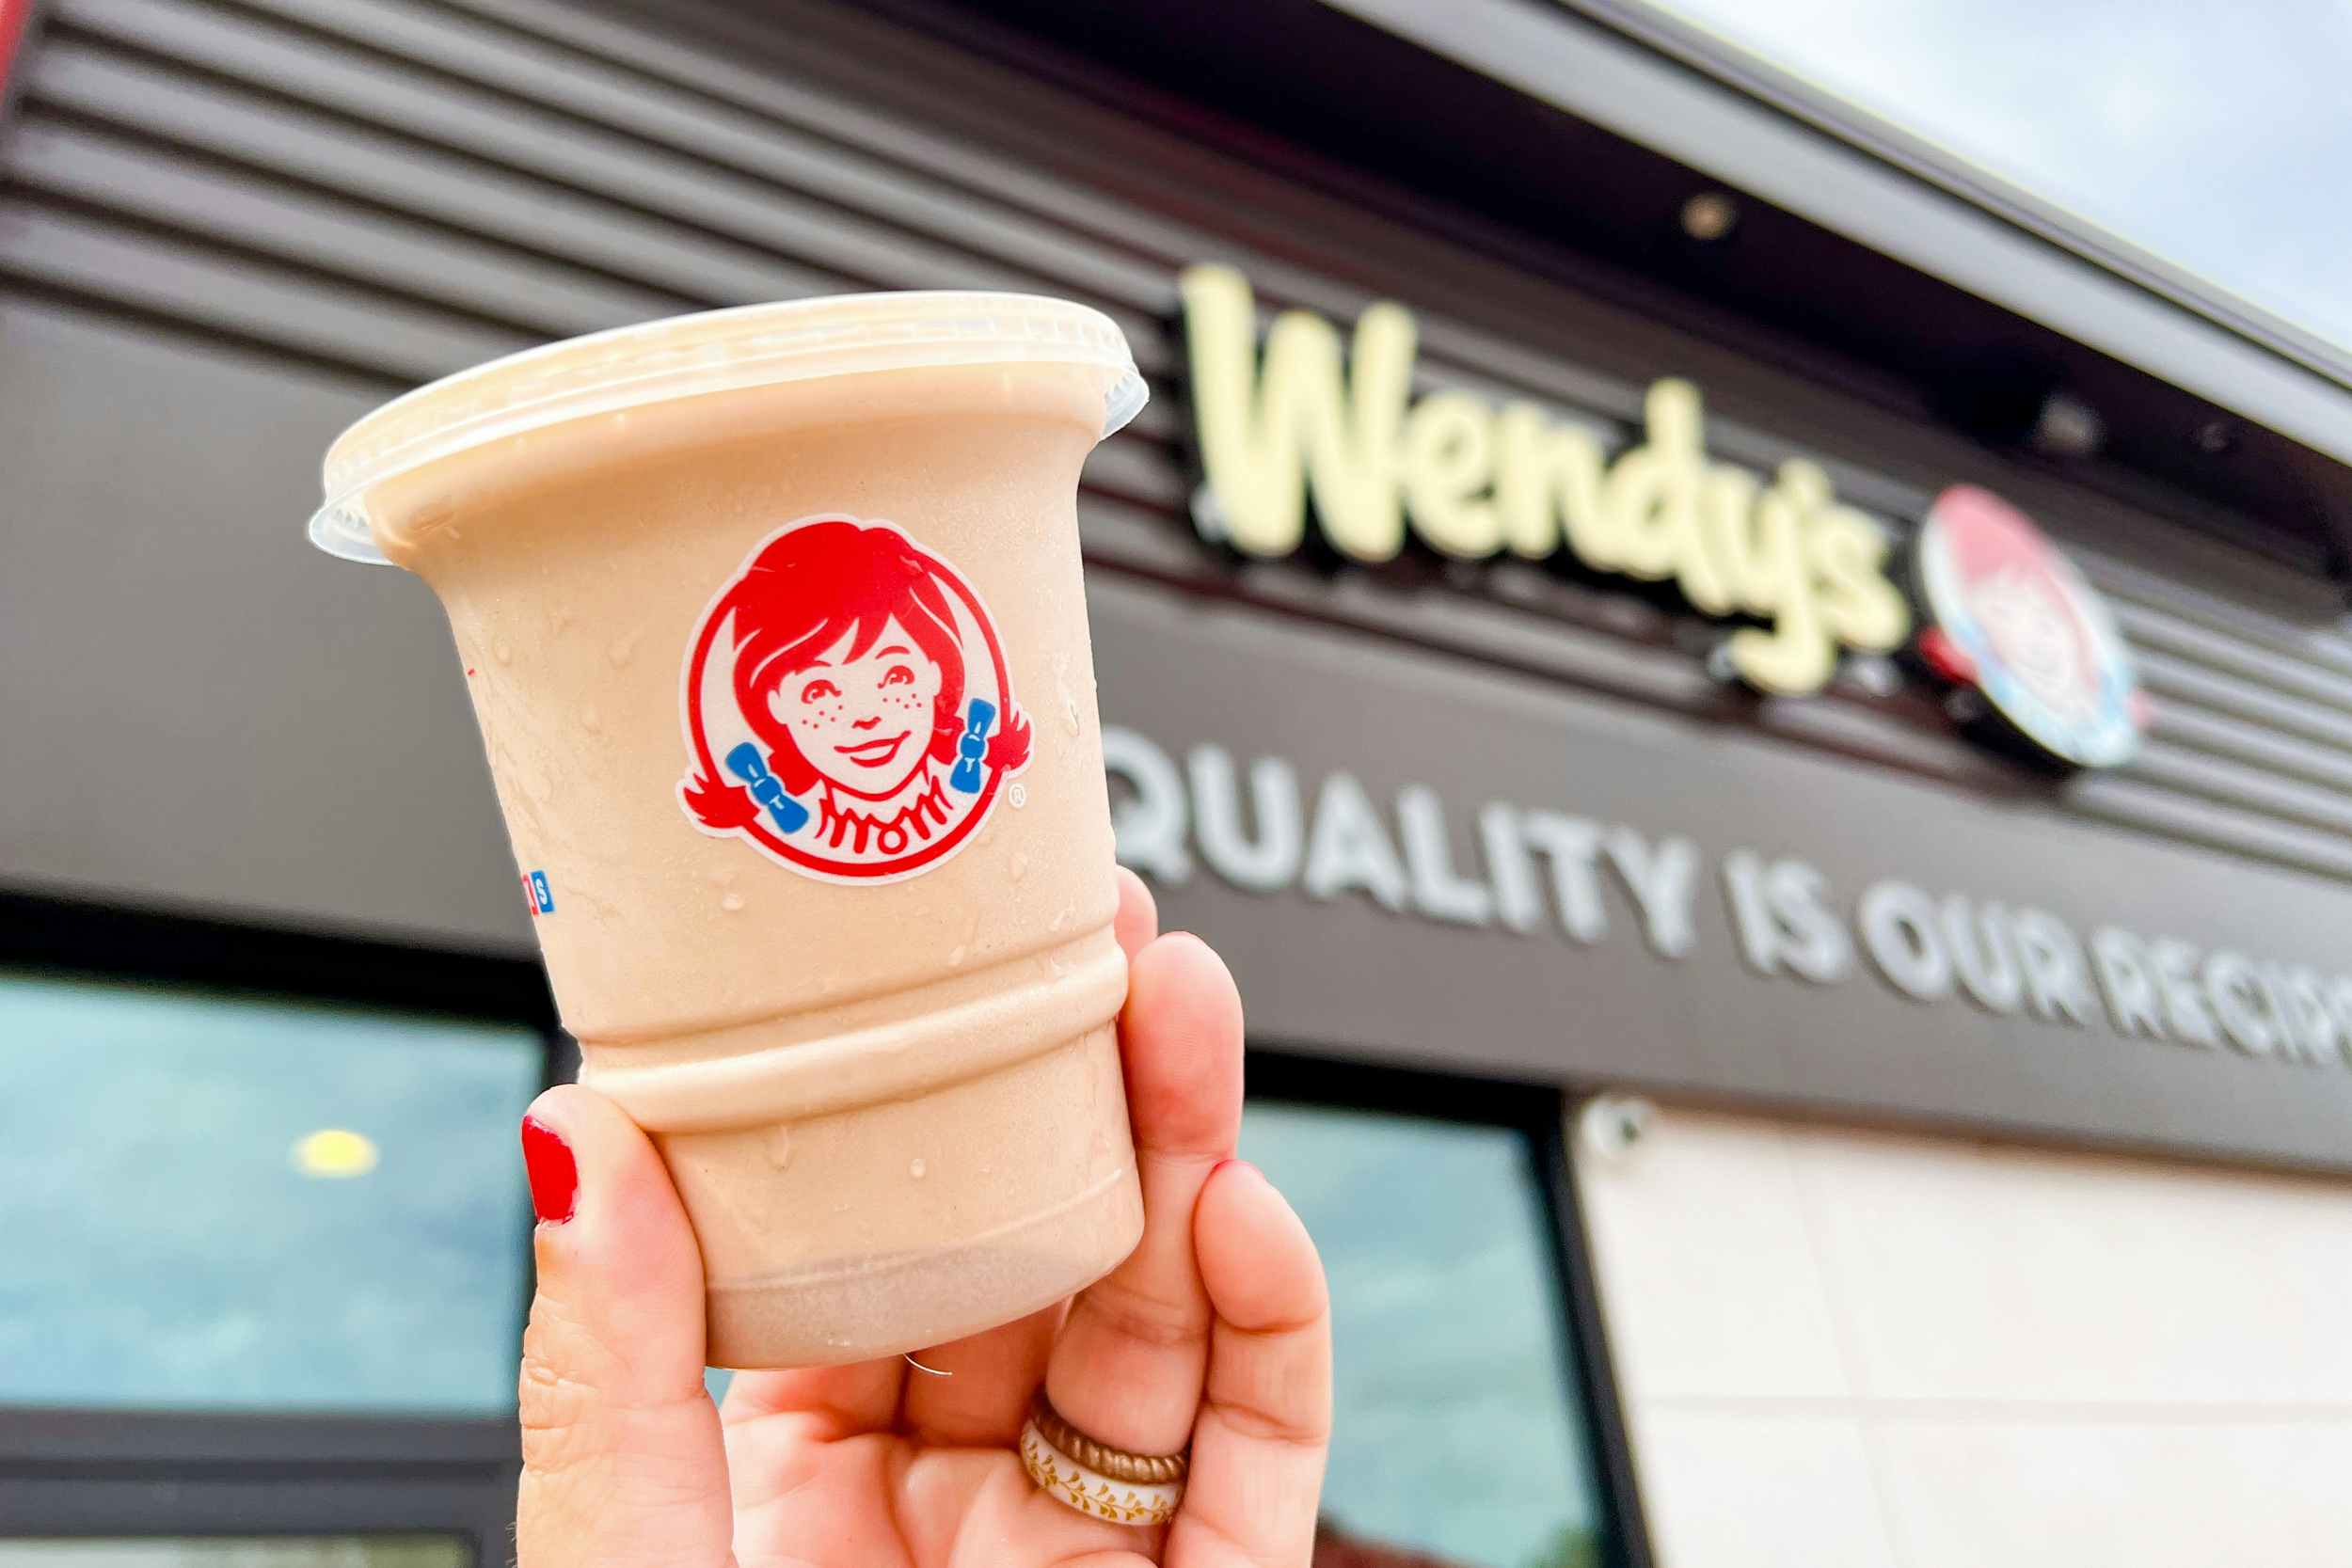 a small wendy's frosty being held up in front of a wendy's sign